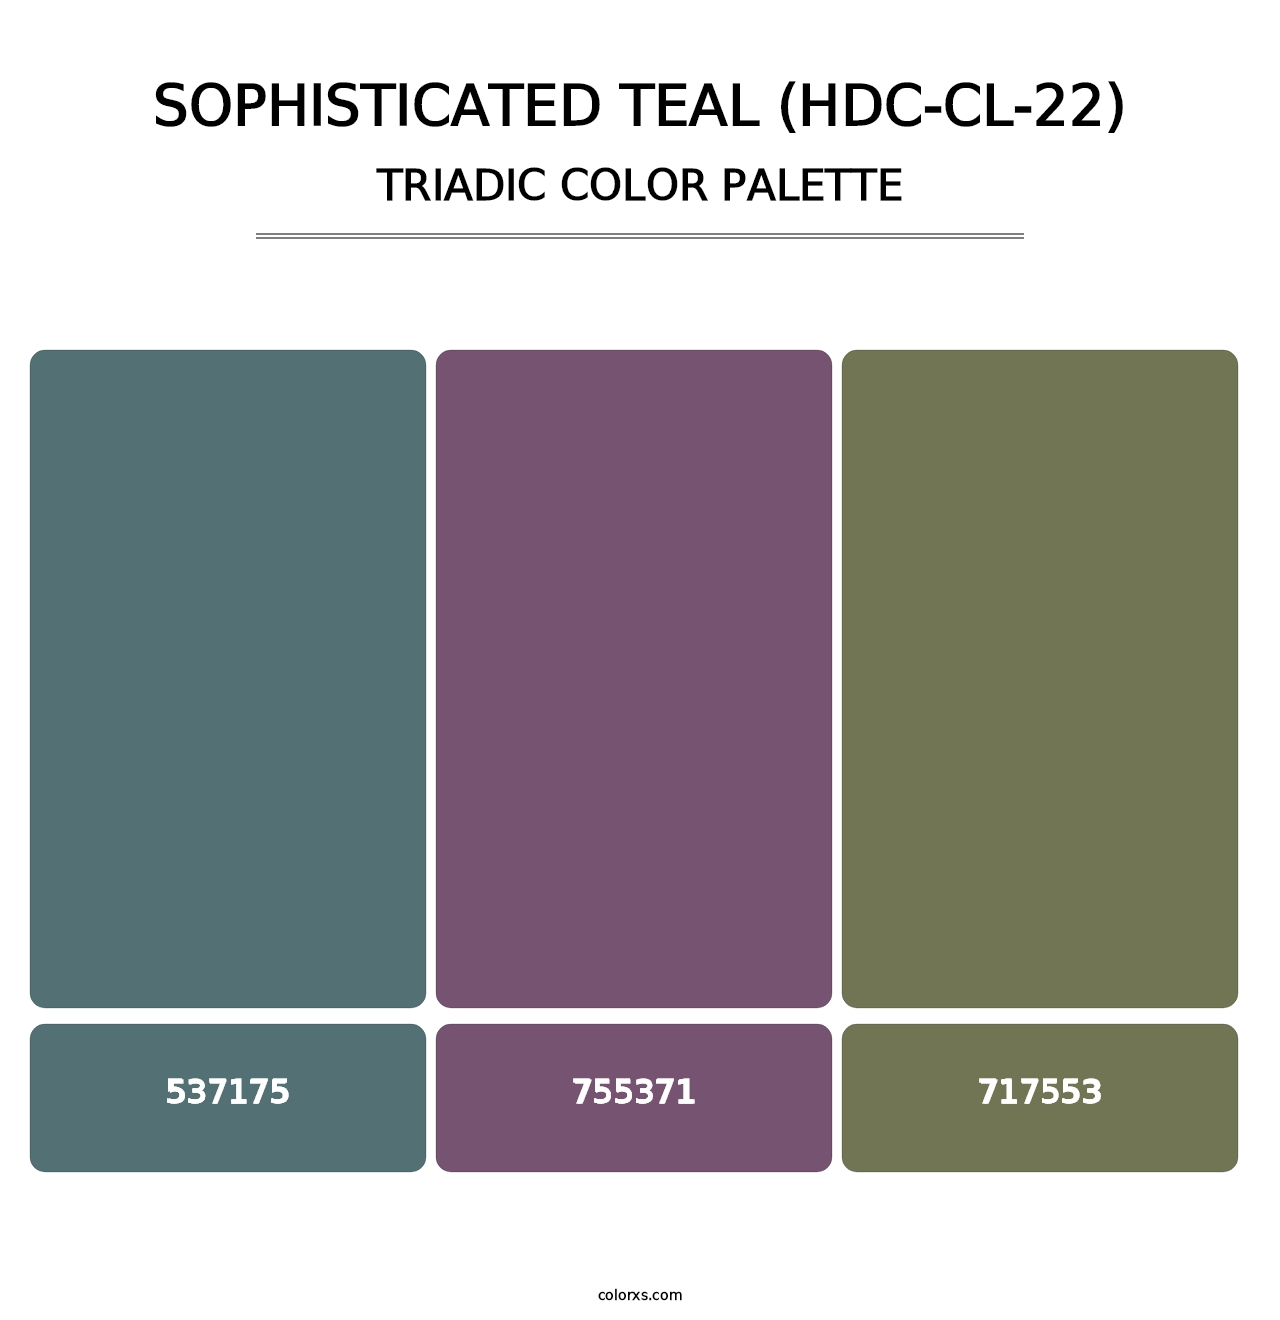 Sophisticated Teal (HDC-CL-22) - Triadic Color Palette